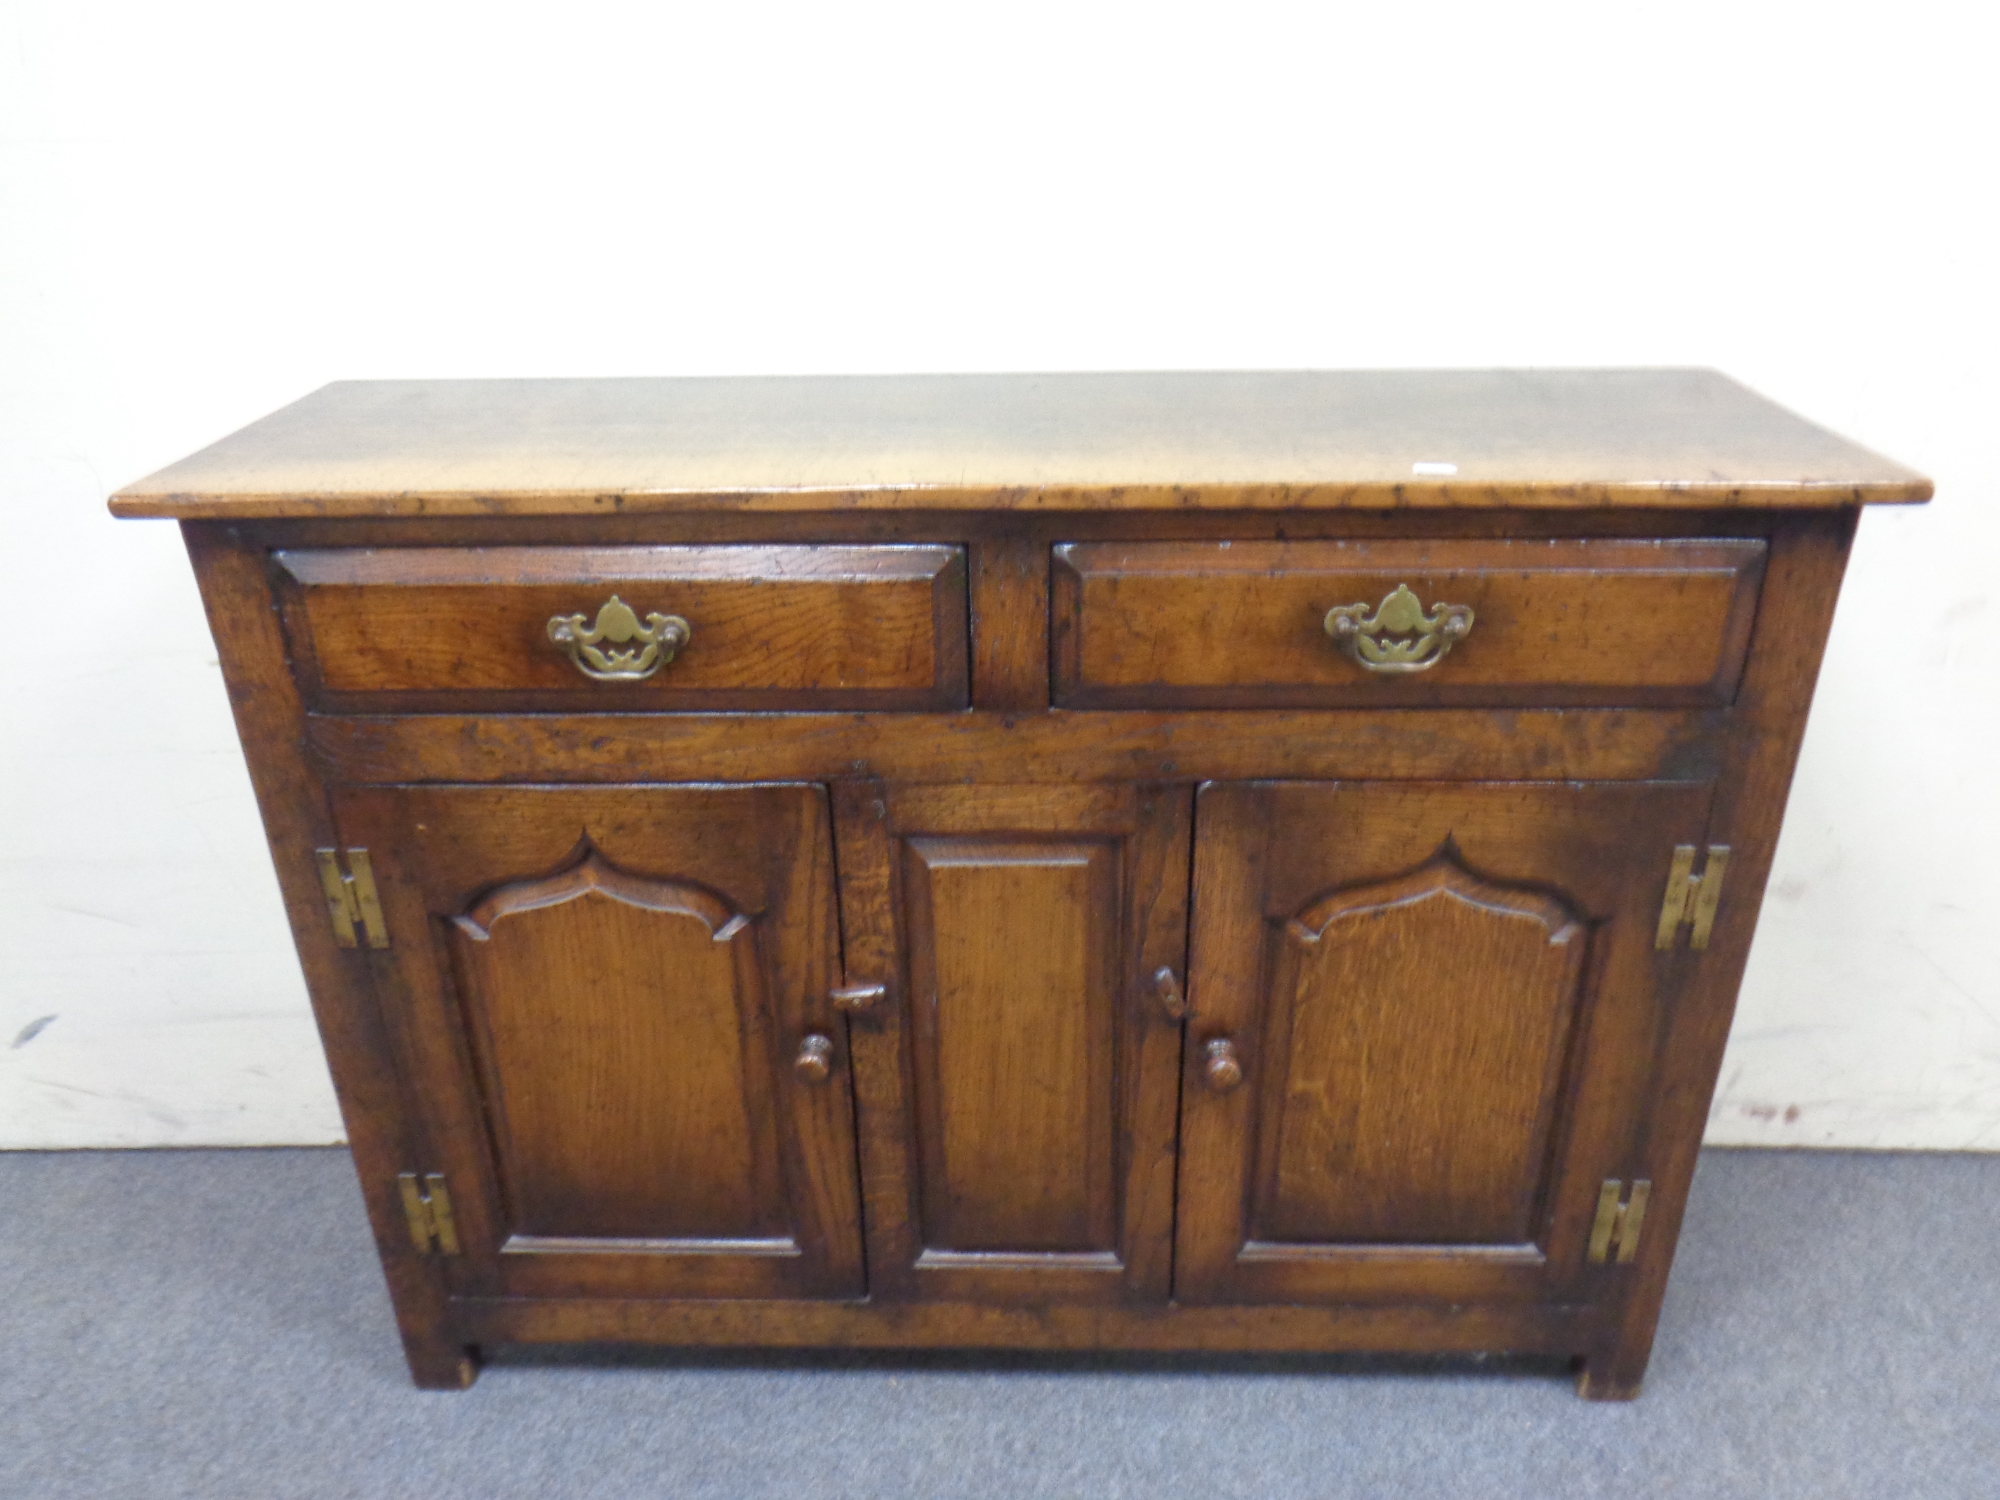 A good quality Chapman's Siesta Georgian style oak double door sideboard fitted two drawers